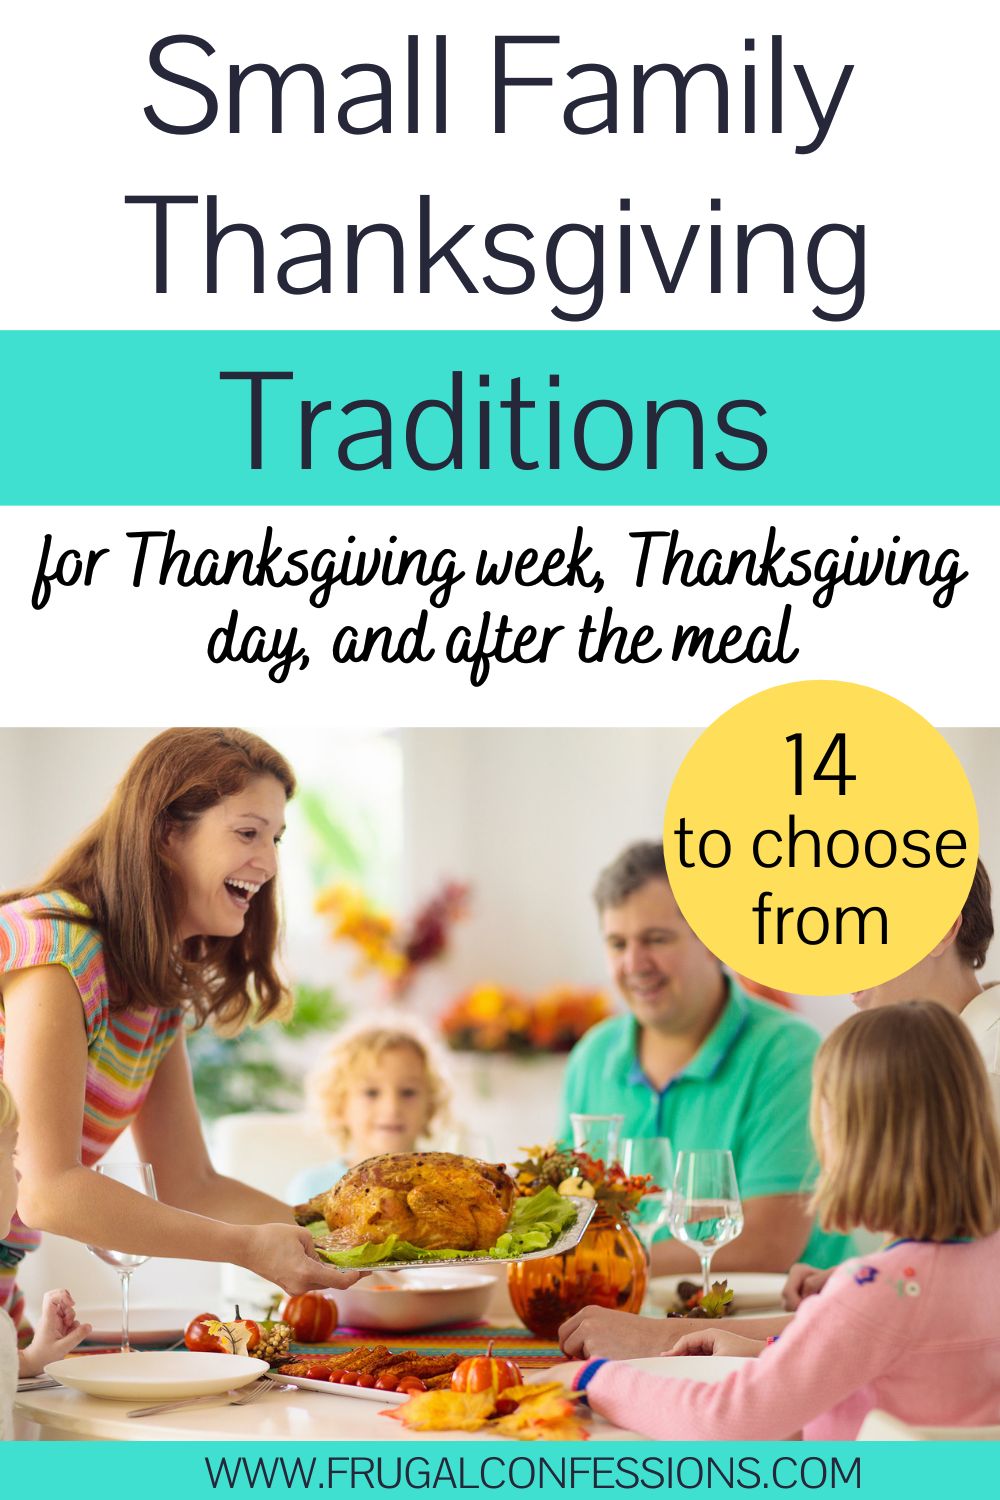 small family of 5 with Mom holding up turkey at dinner table, text overlay "small family Thanksgiving traditions"